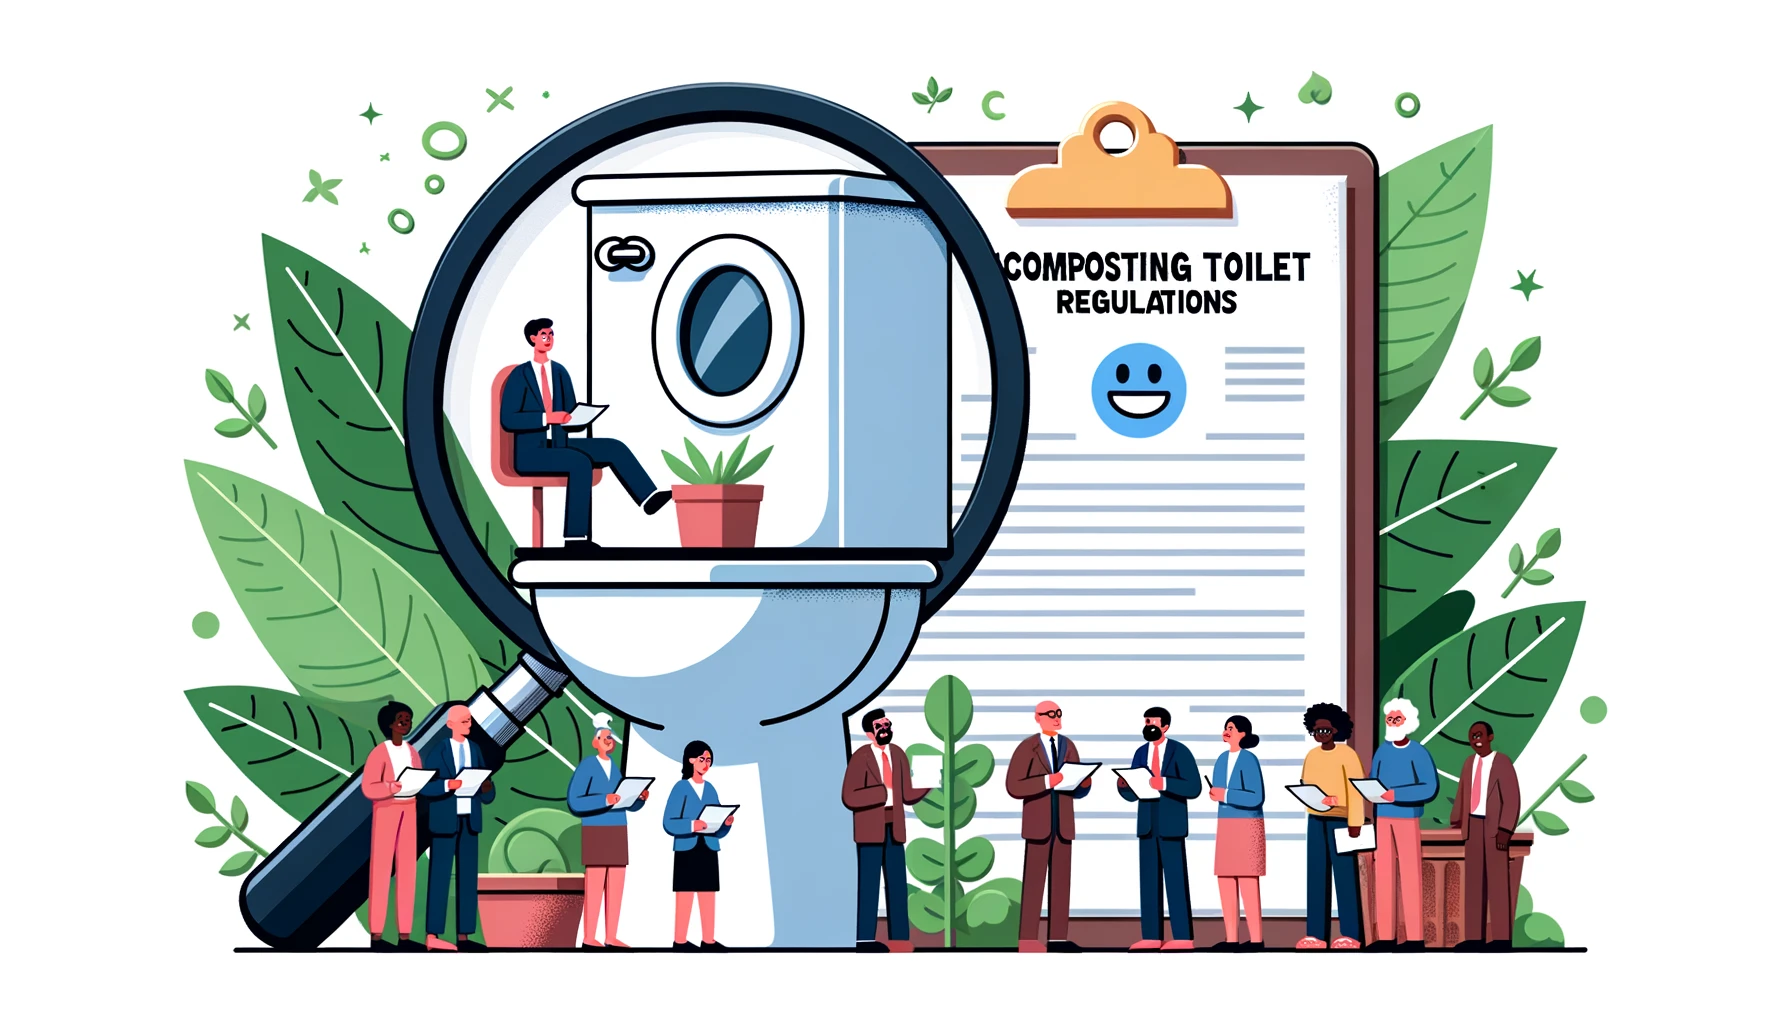 Are Composting Toilets Legal?